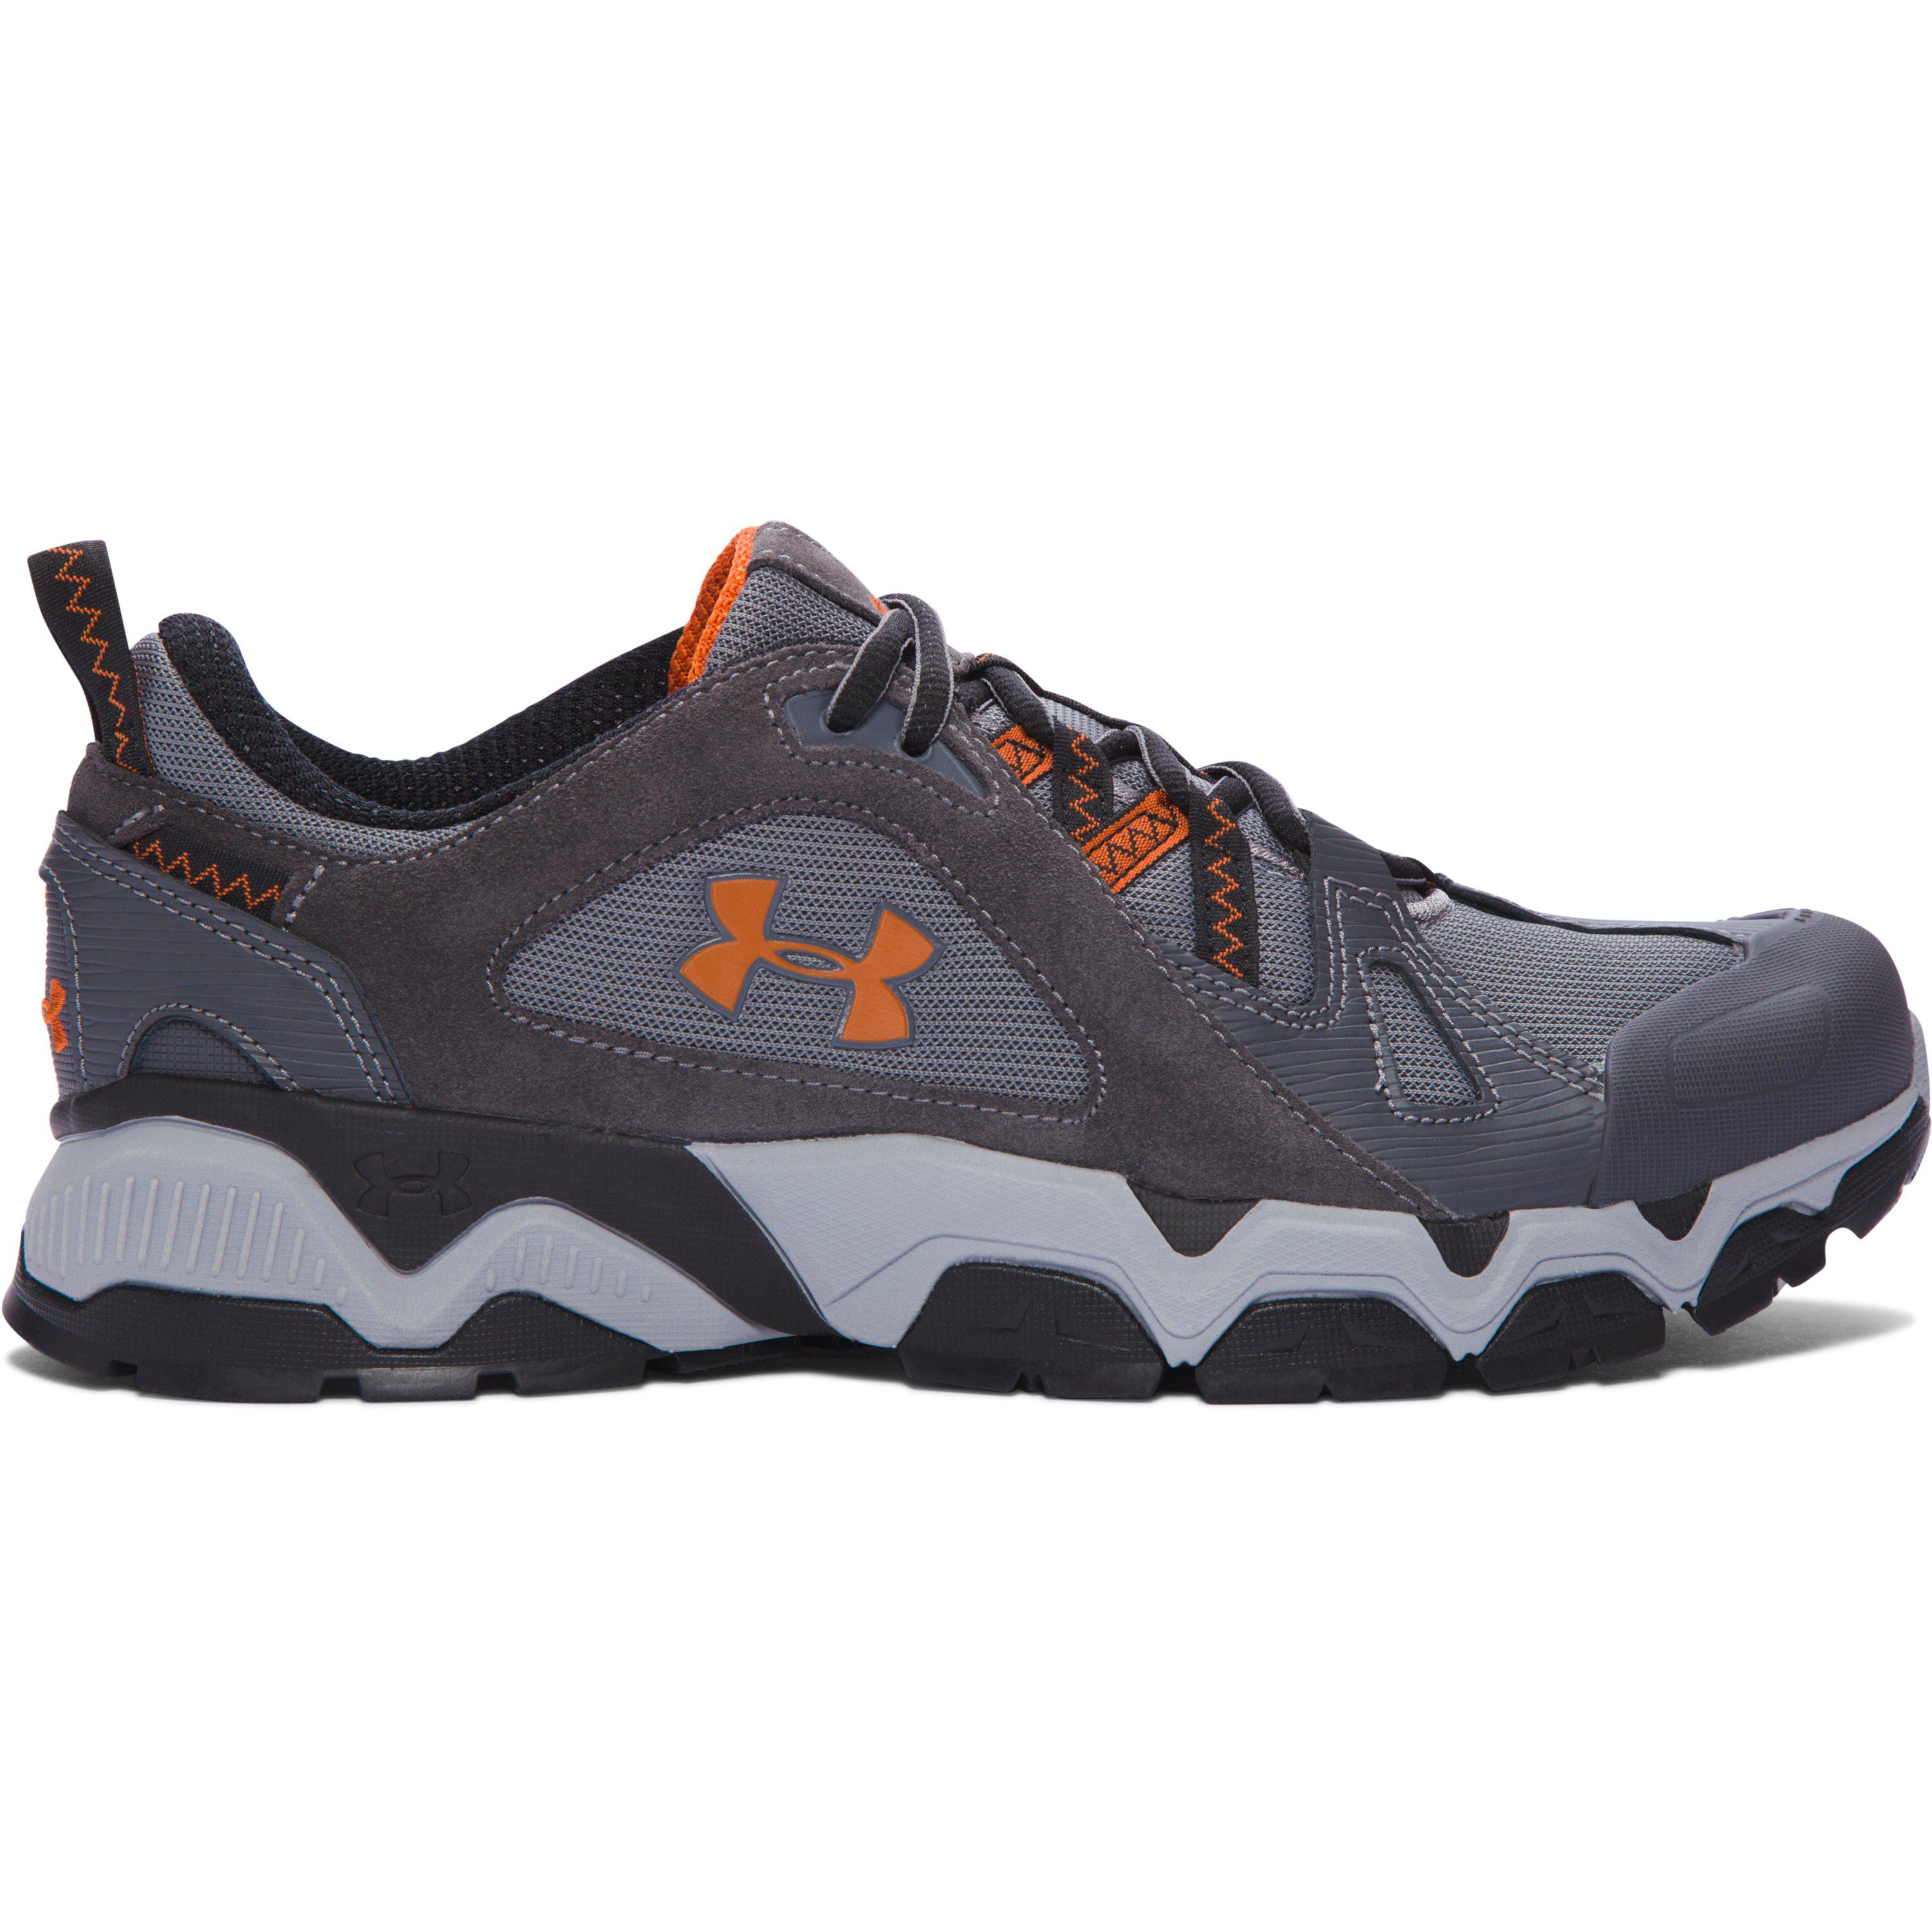 Under Armour Men's Ua Chetco 2.0 Trail Running Shoes for Men - Lyst